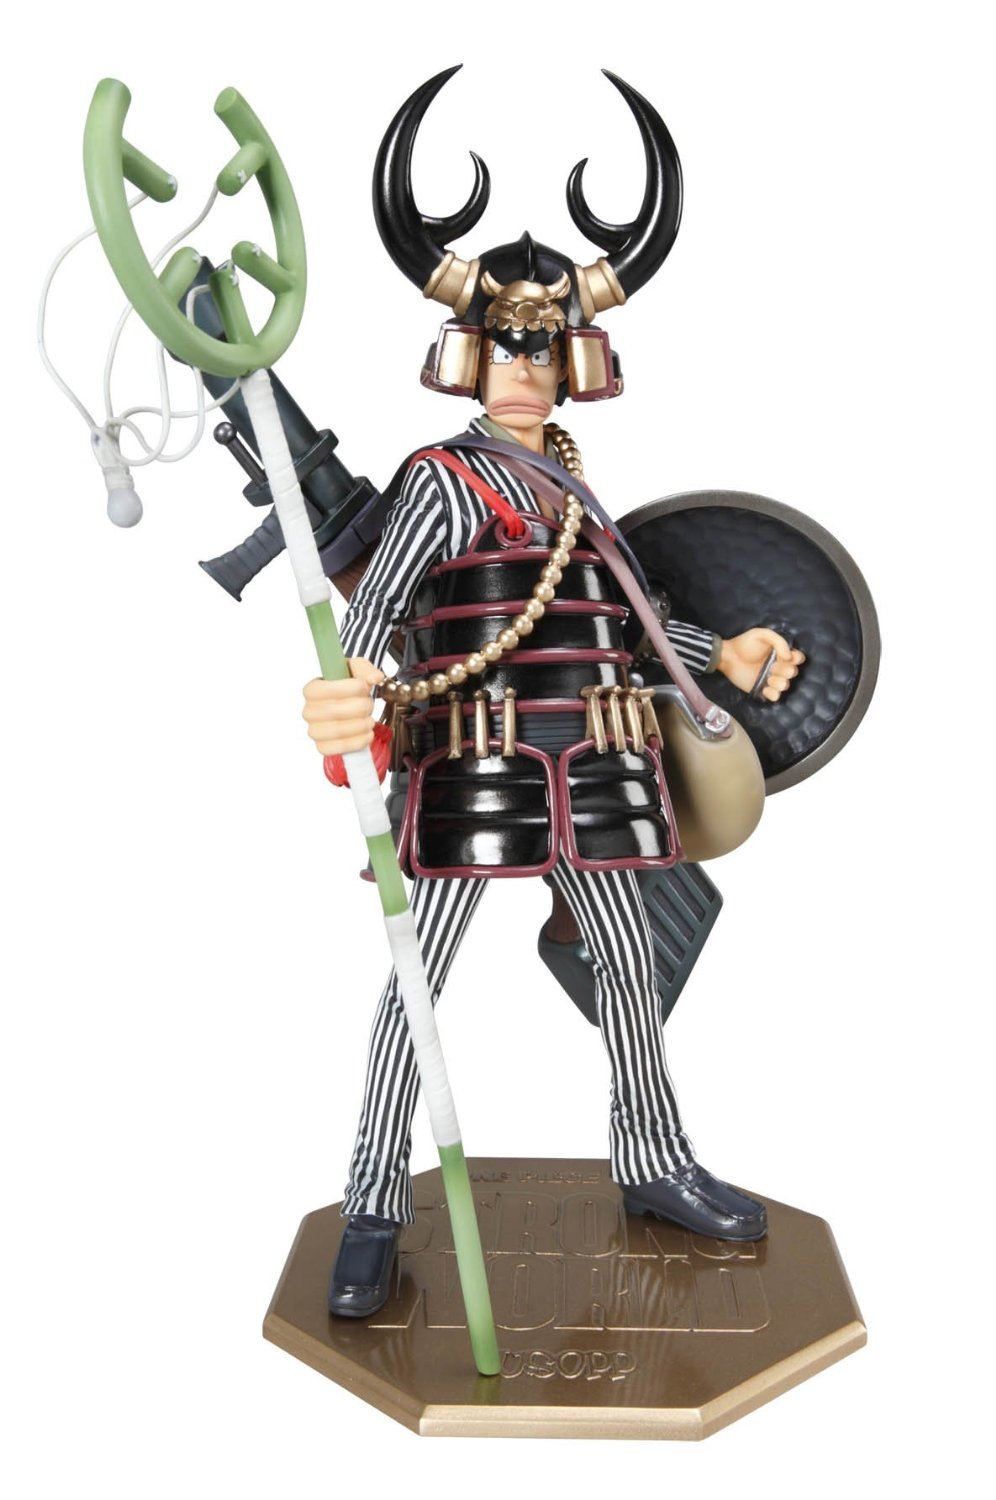 Excellent Model One Piece Portraits of Pirates 1/8 Scale Pre 